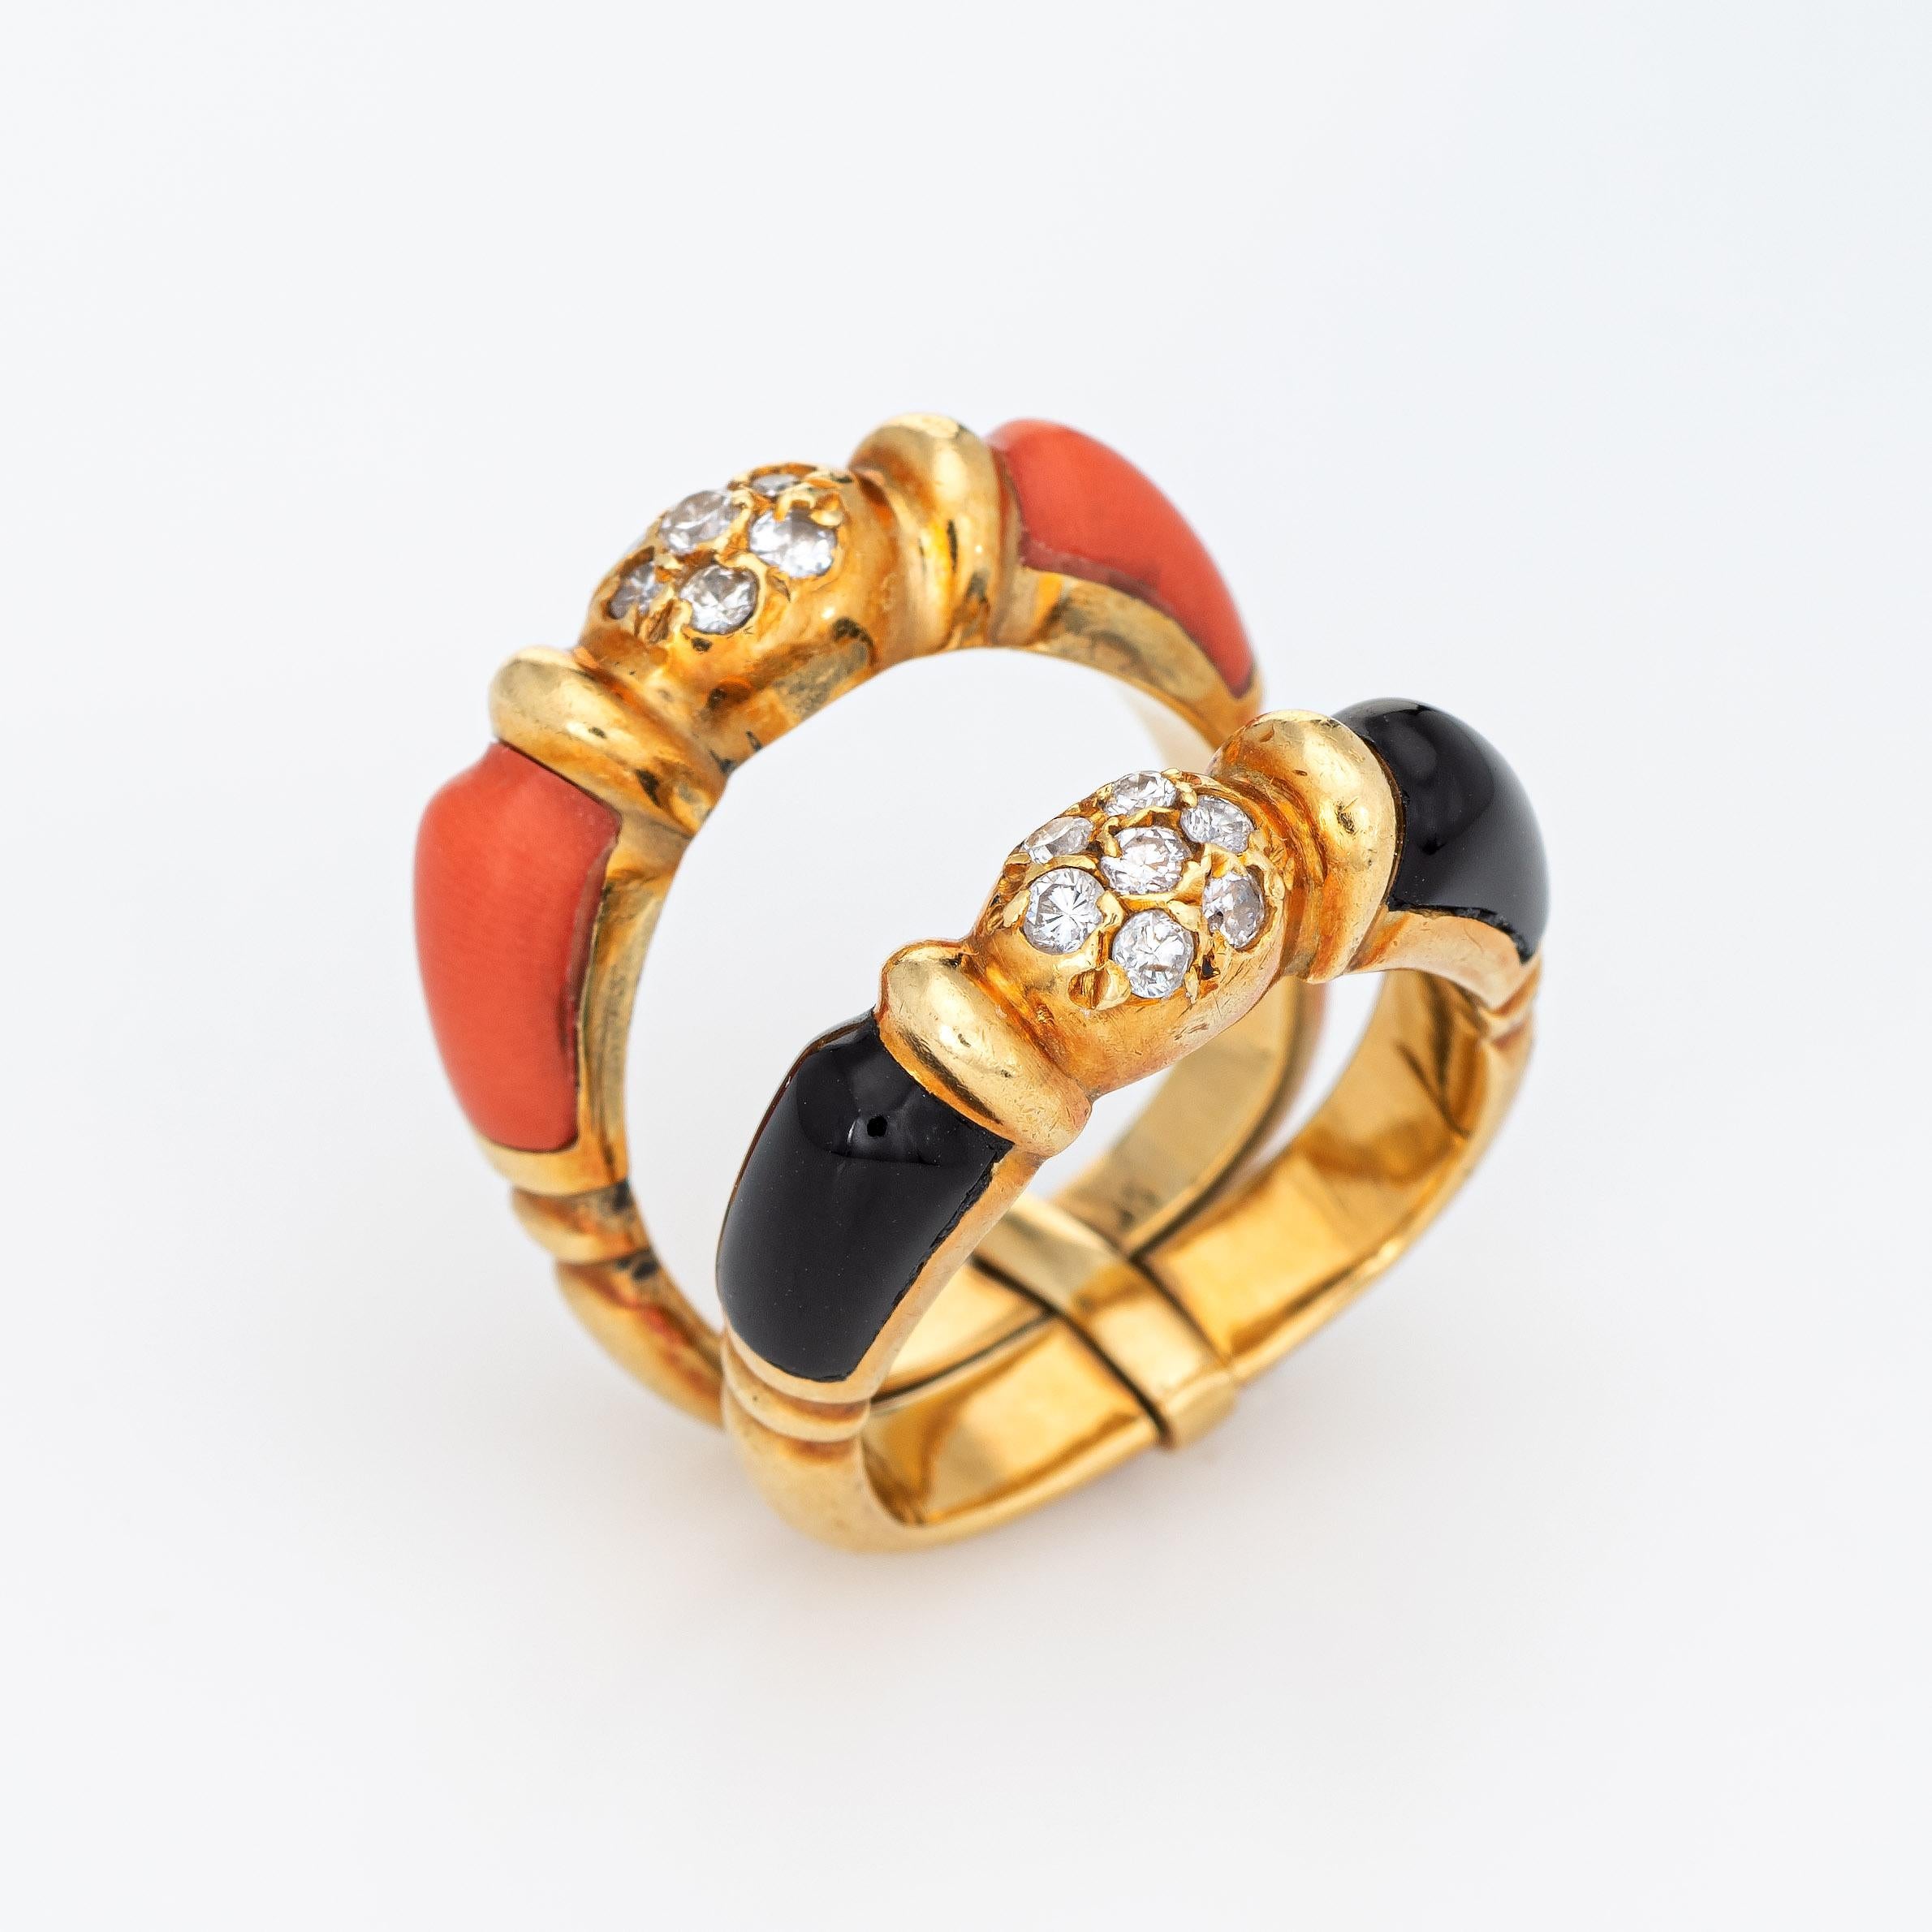 Stylish vintage set of 2 diamond, coral & onyx rings (circa 1970s) crafted in 18 karat yellow gold. 

Diamonds total an estimated 0.28 carats (estimated at H-I color and VS2-SI2 clarity). Onyx and coral measures 7mm x 5mm and are inlaid into the